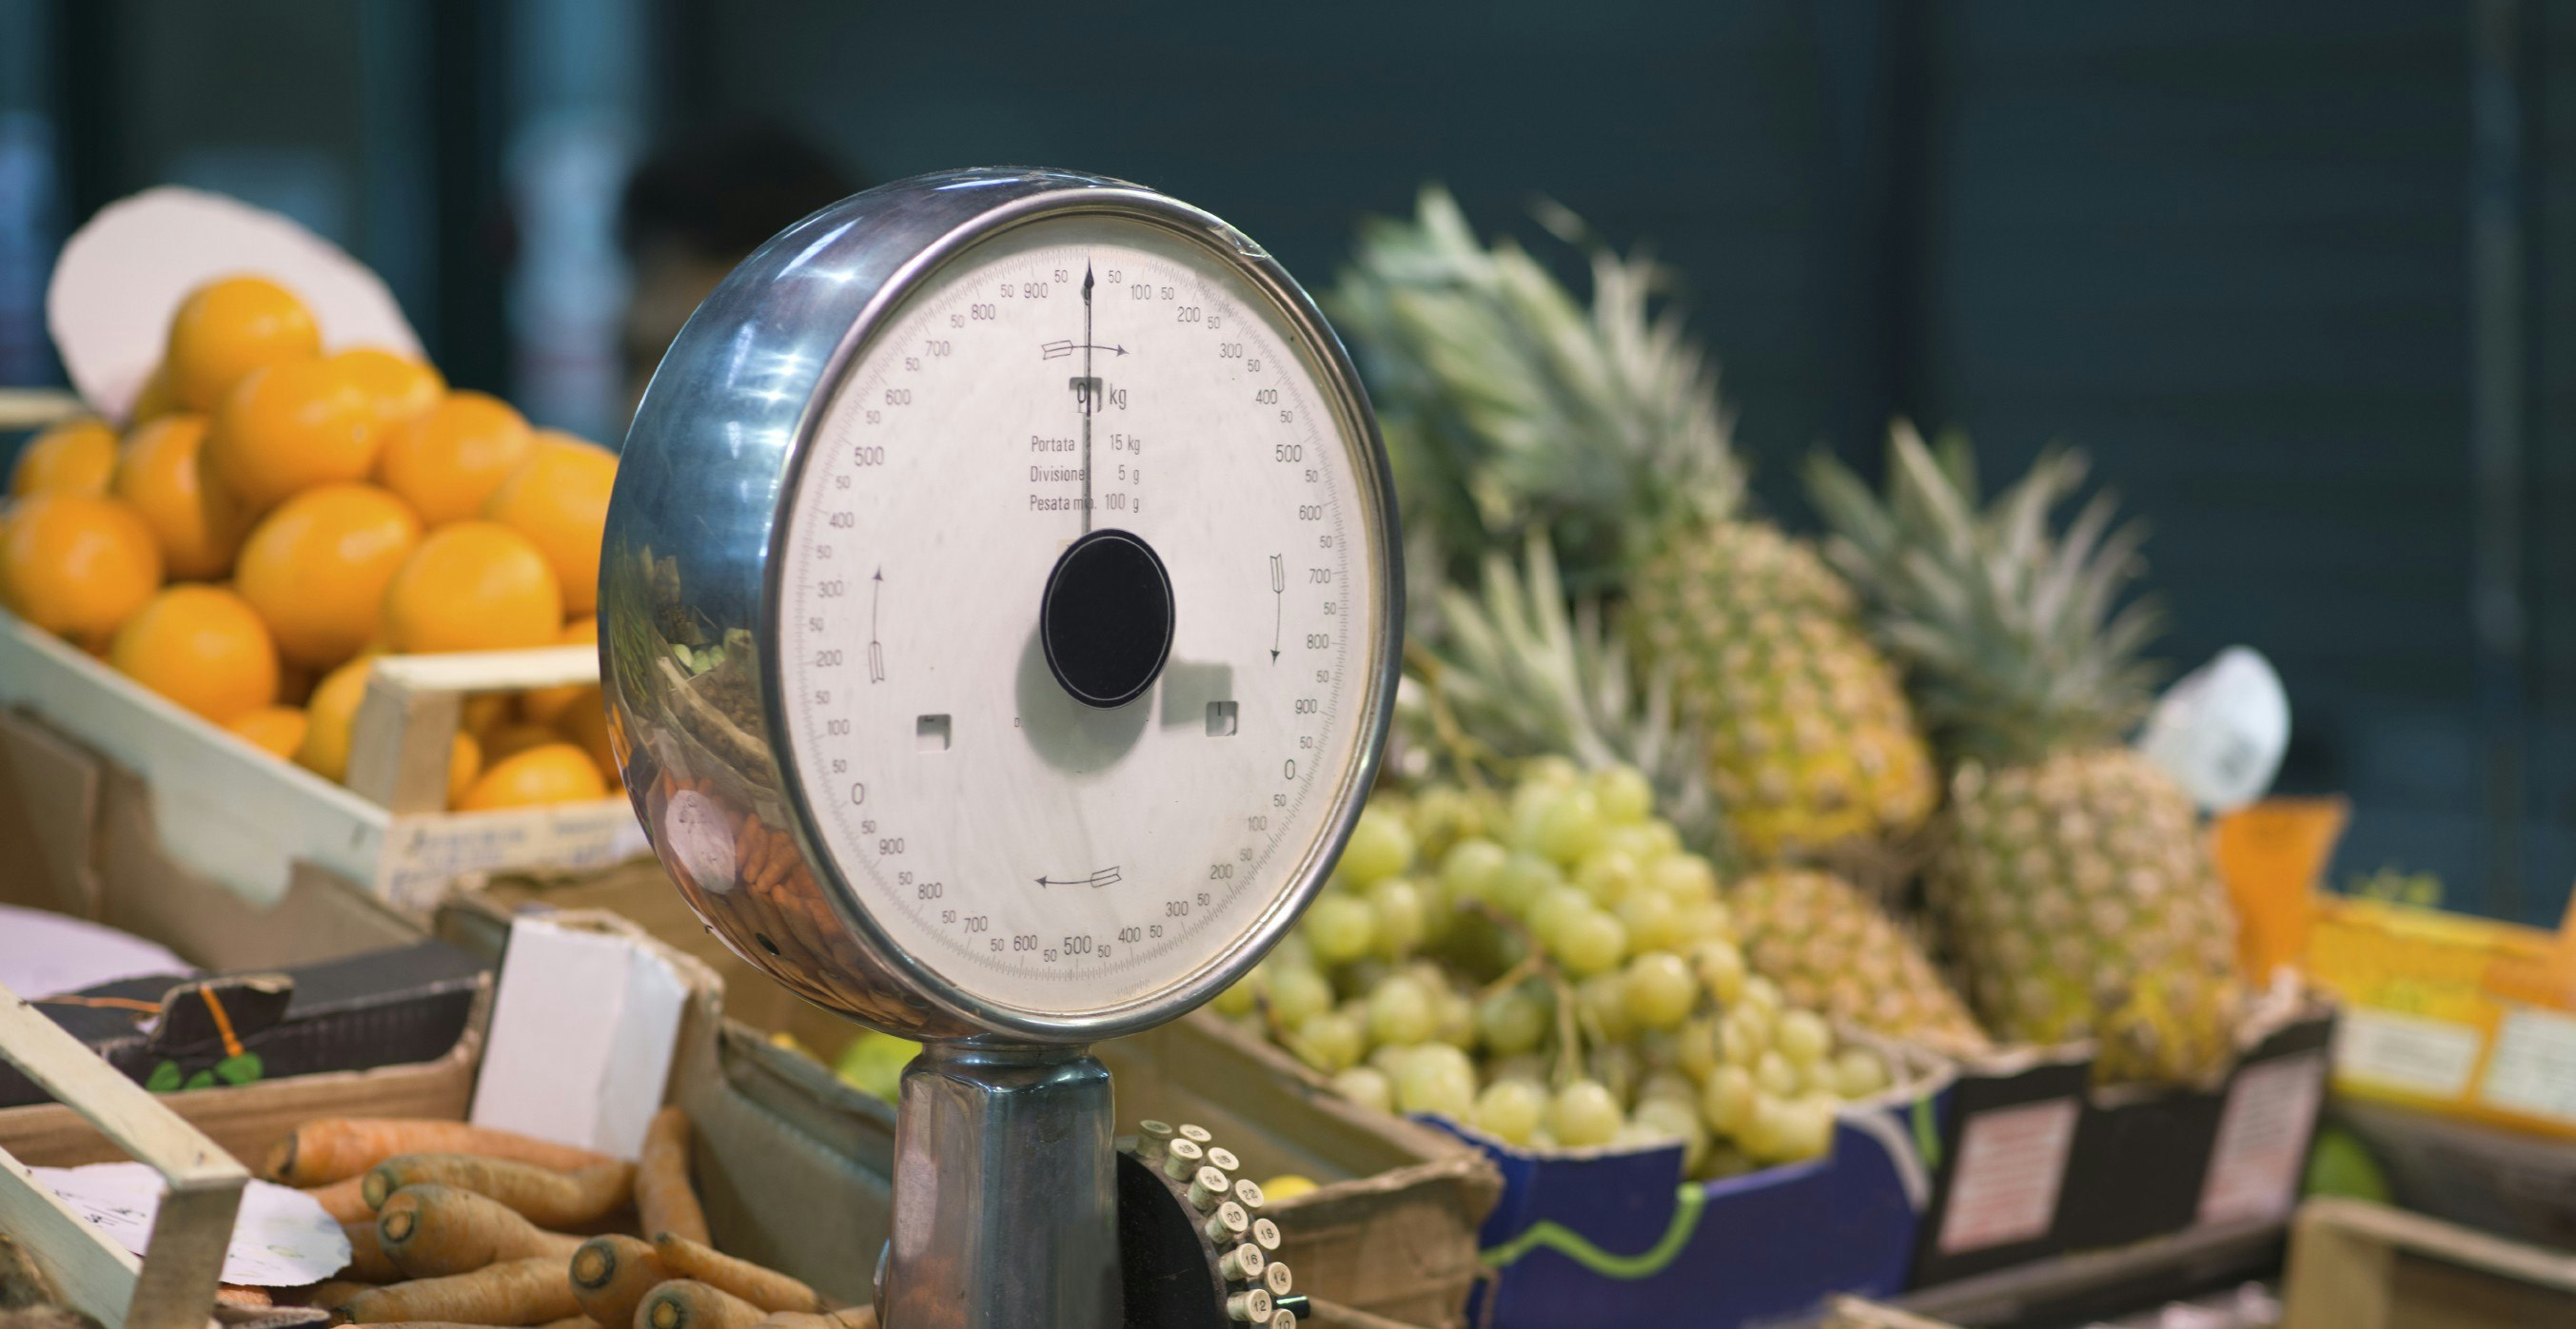 How to determine weight of ingredients for juice